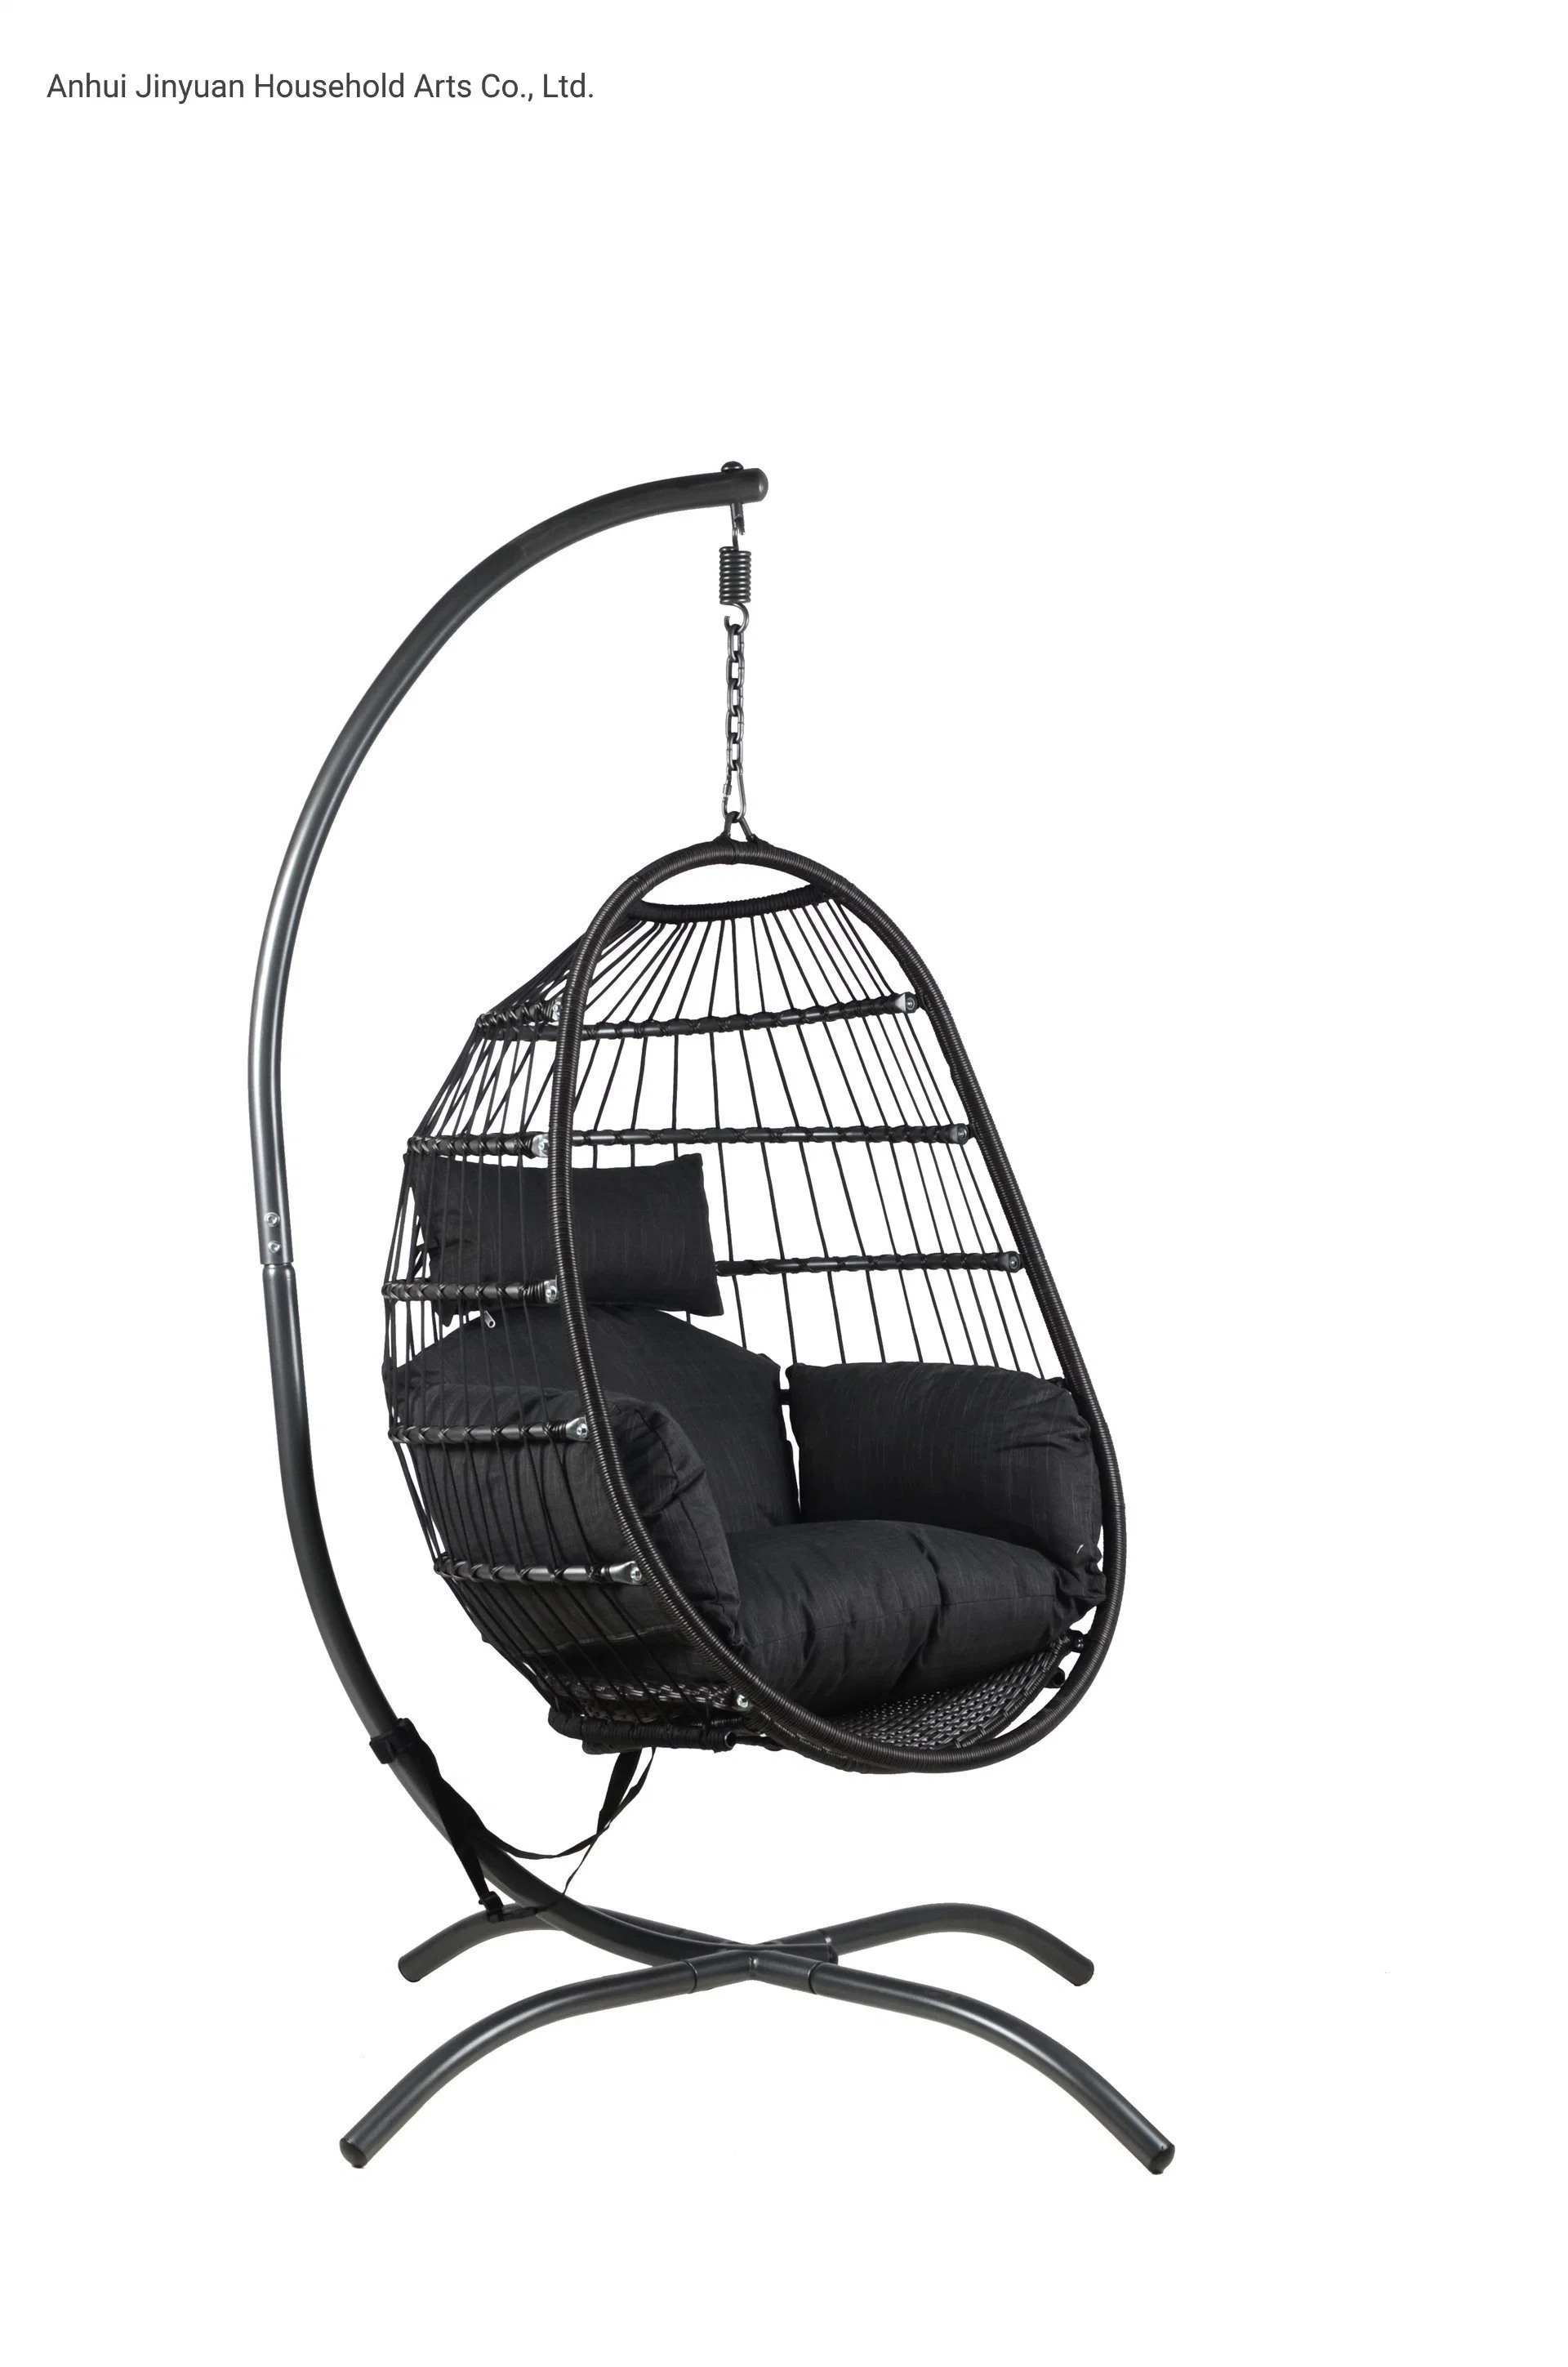 Outdoor Rattan Folding Hanging Leisure Swing Chair Household Swing Rattan Chair